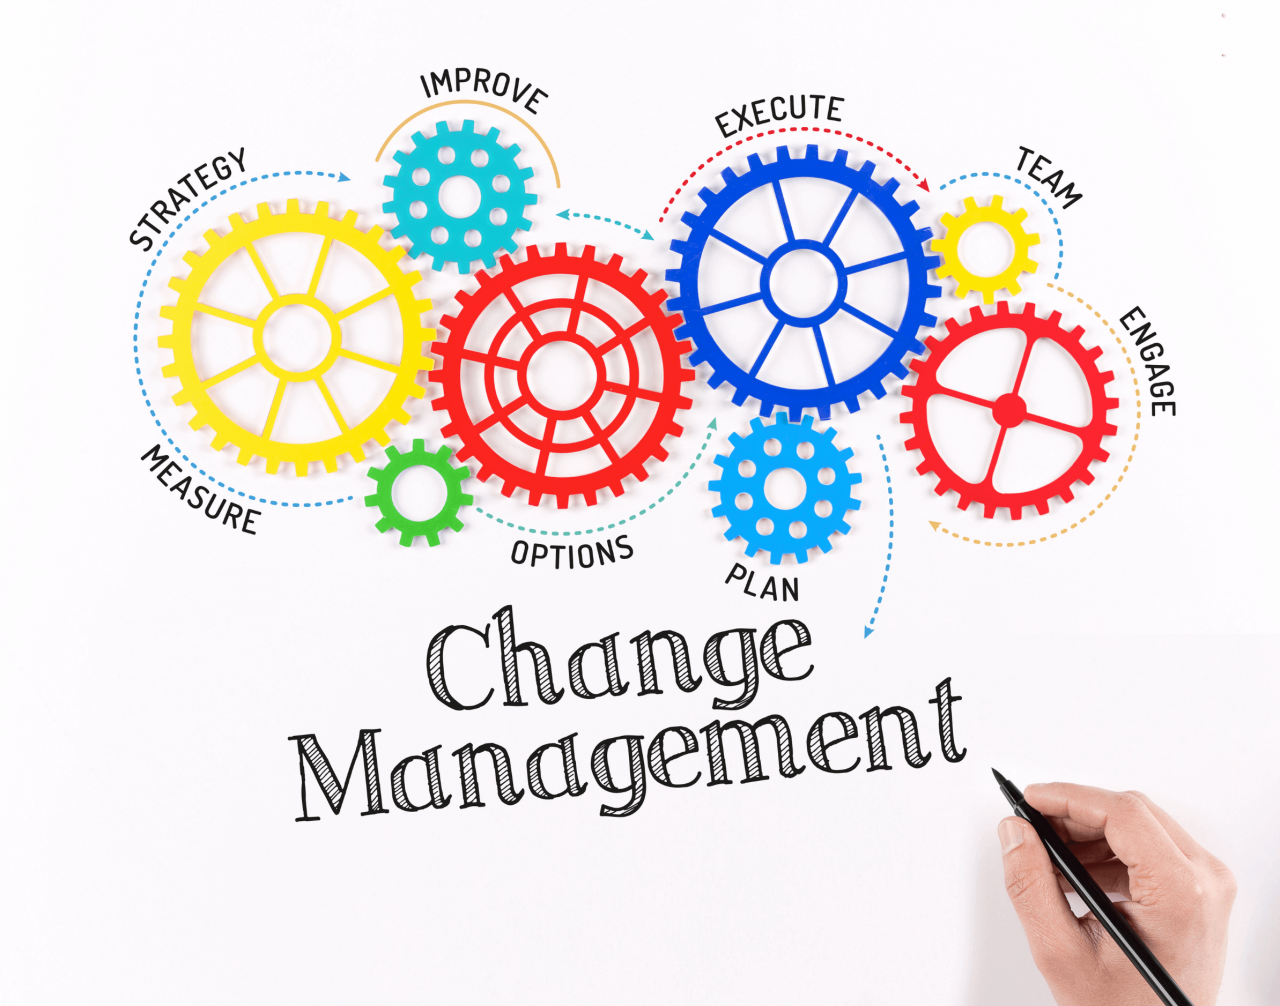 Discuss why change management is important for an organization